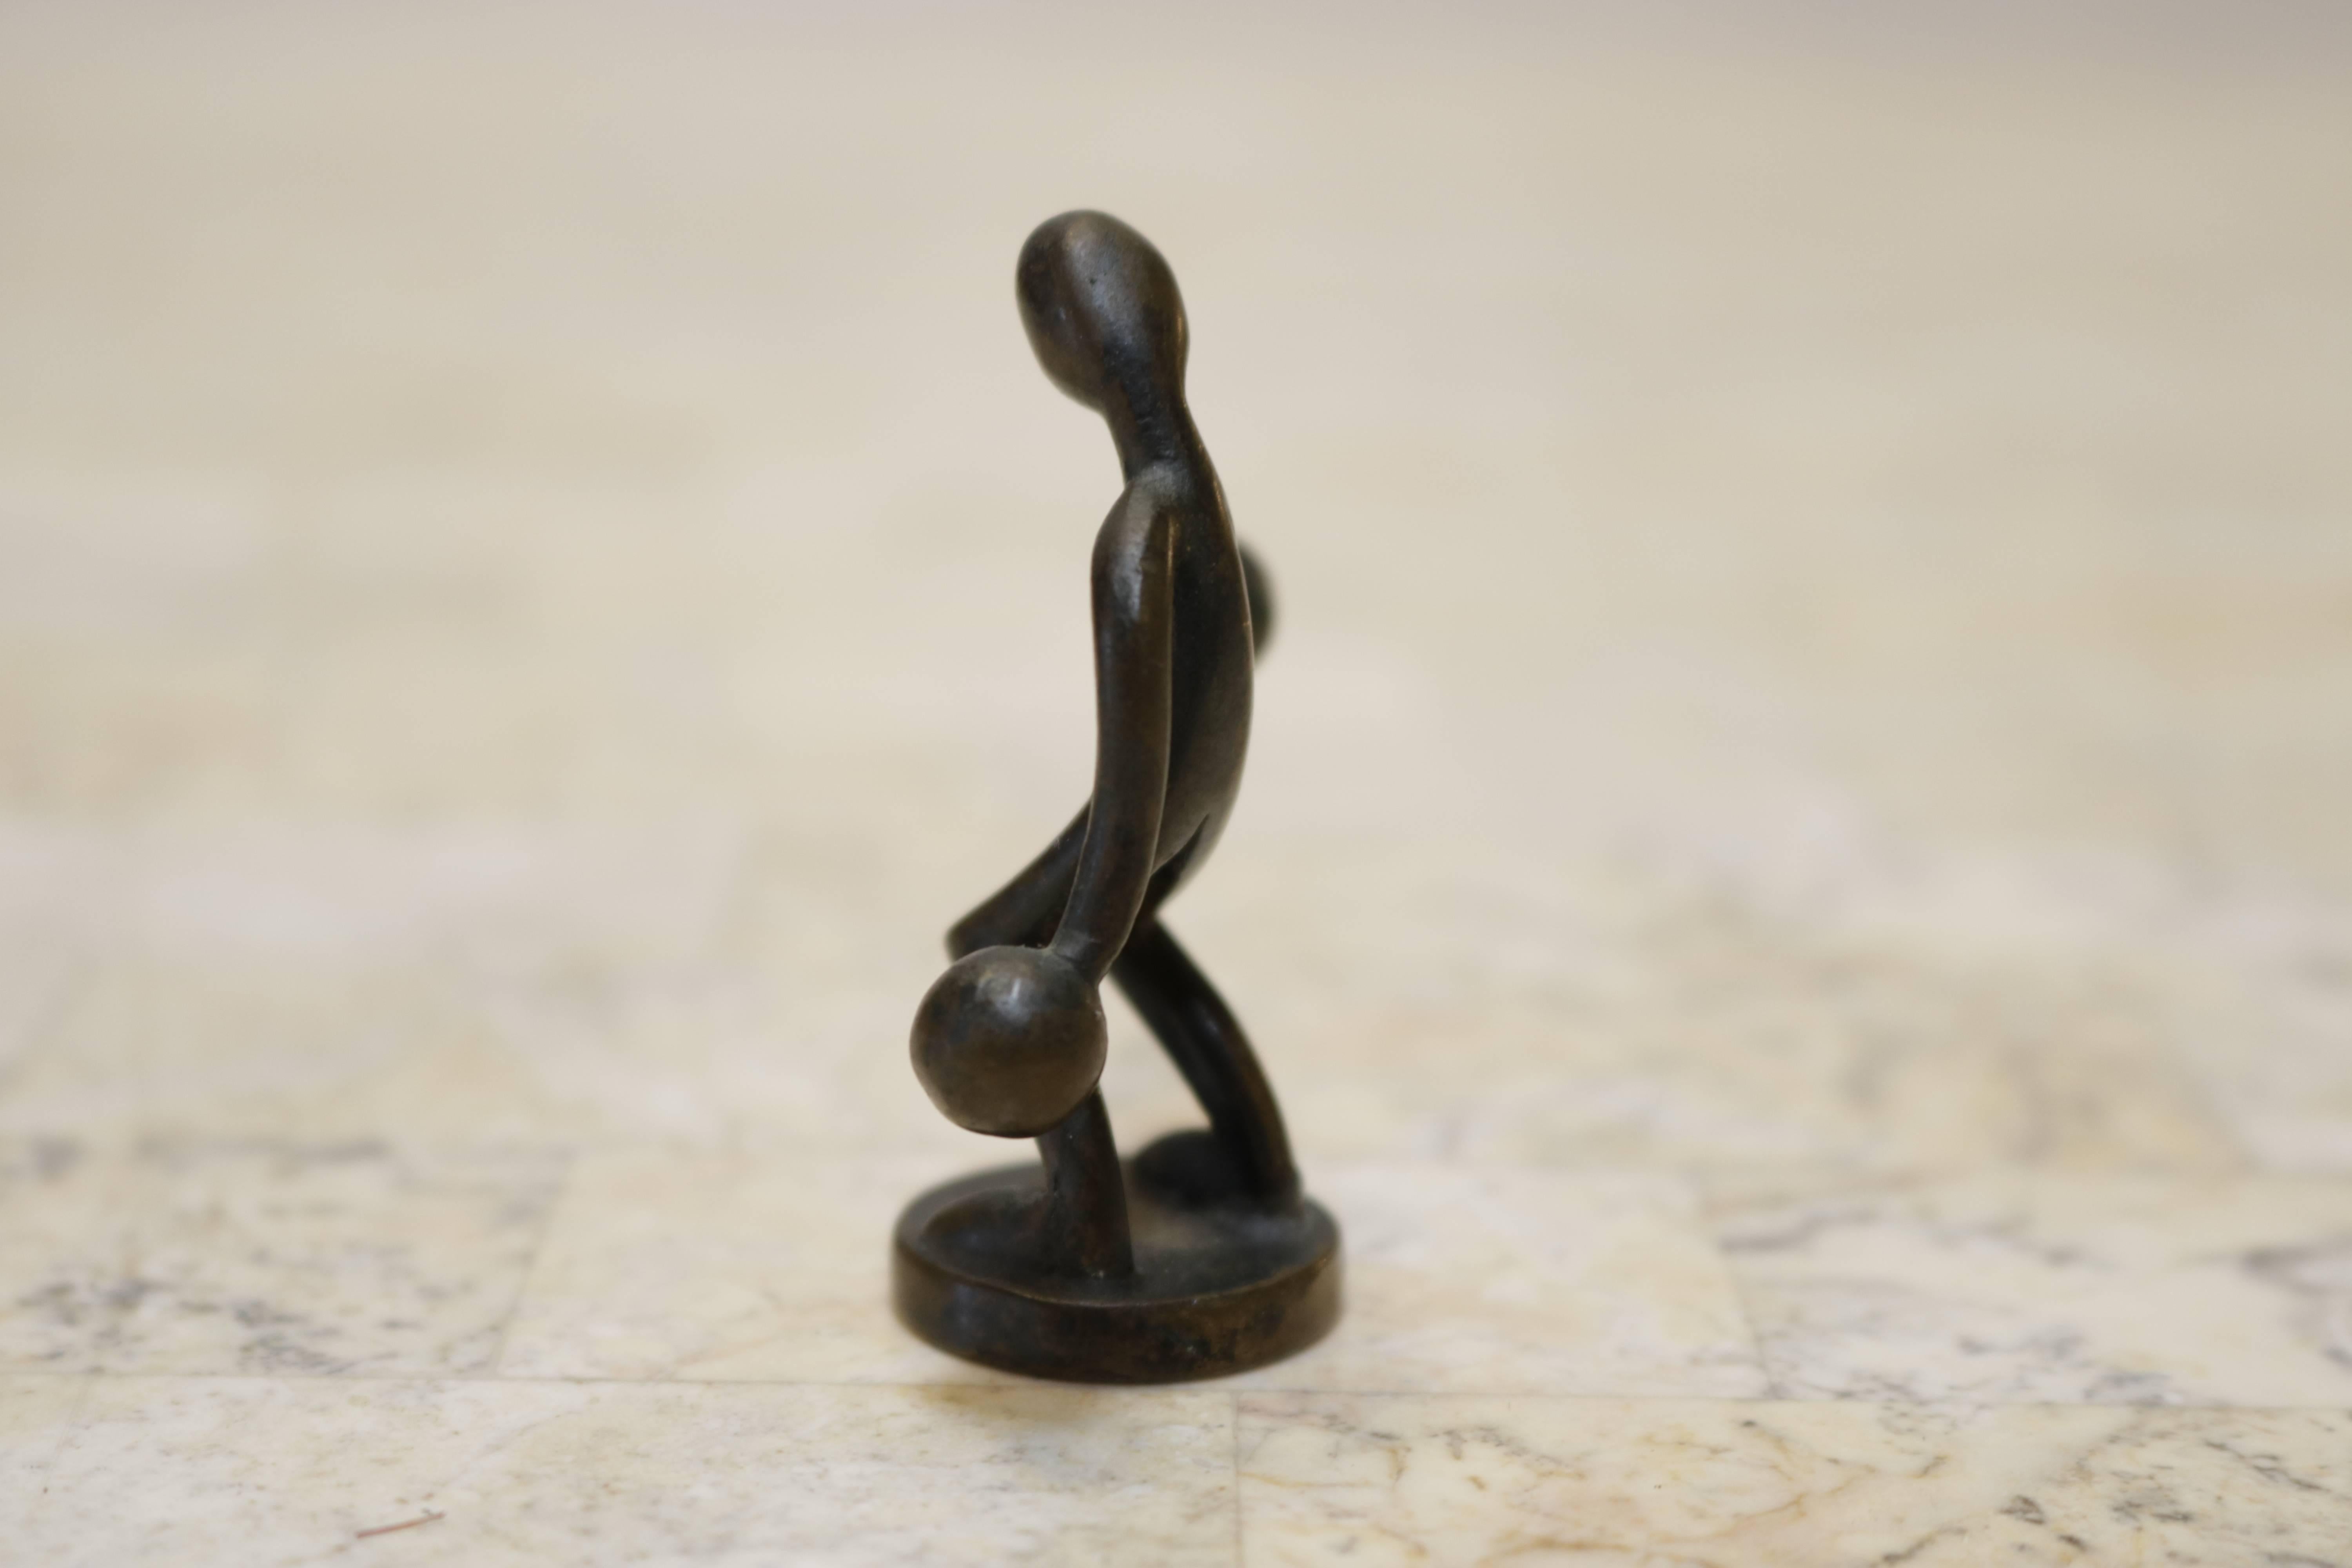 Unusual small bronze figurine of a boxer on a round base. Makes a charming desk accessory or paperweight. No signature.